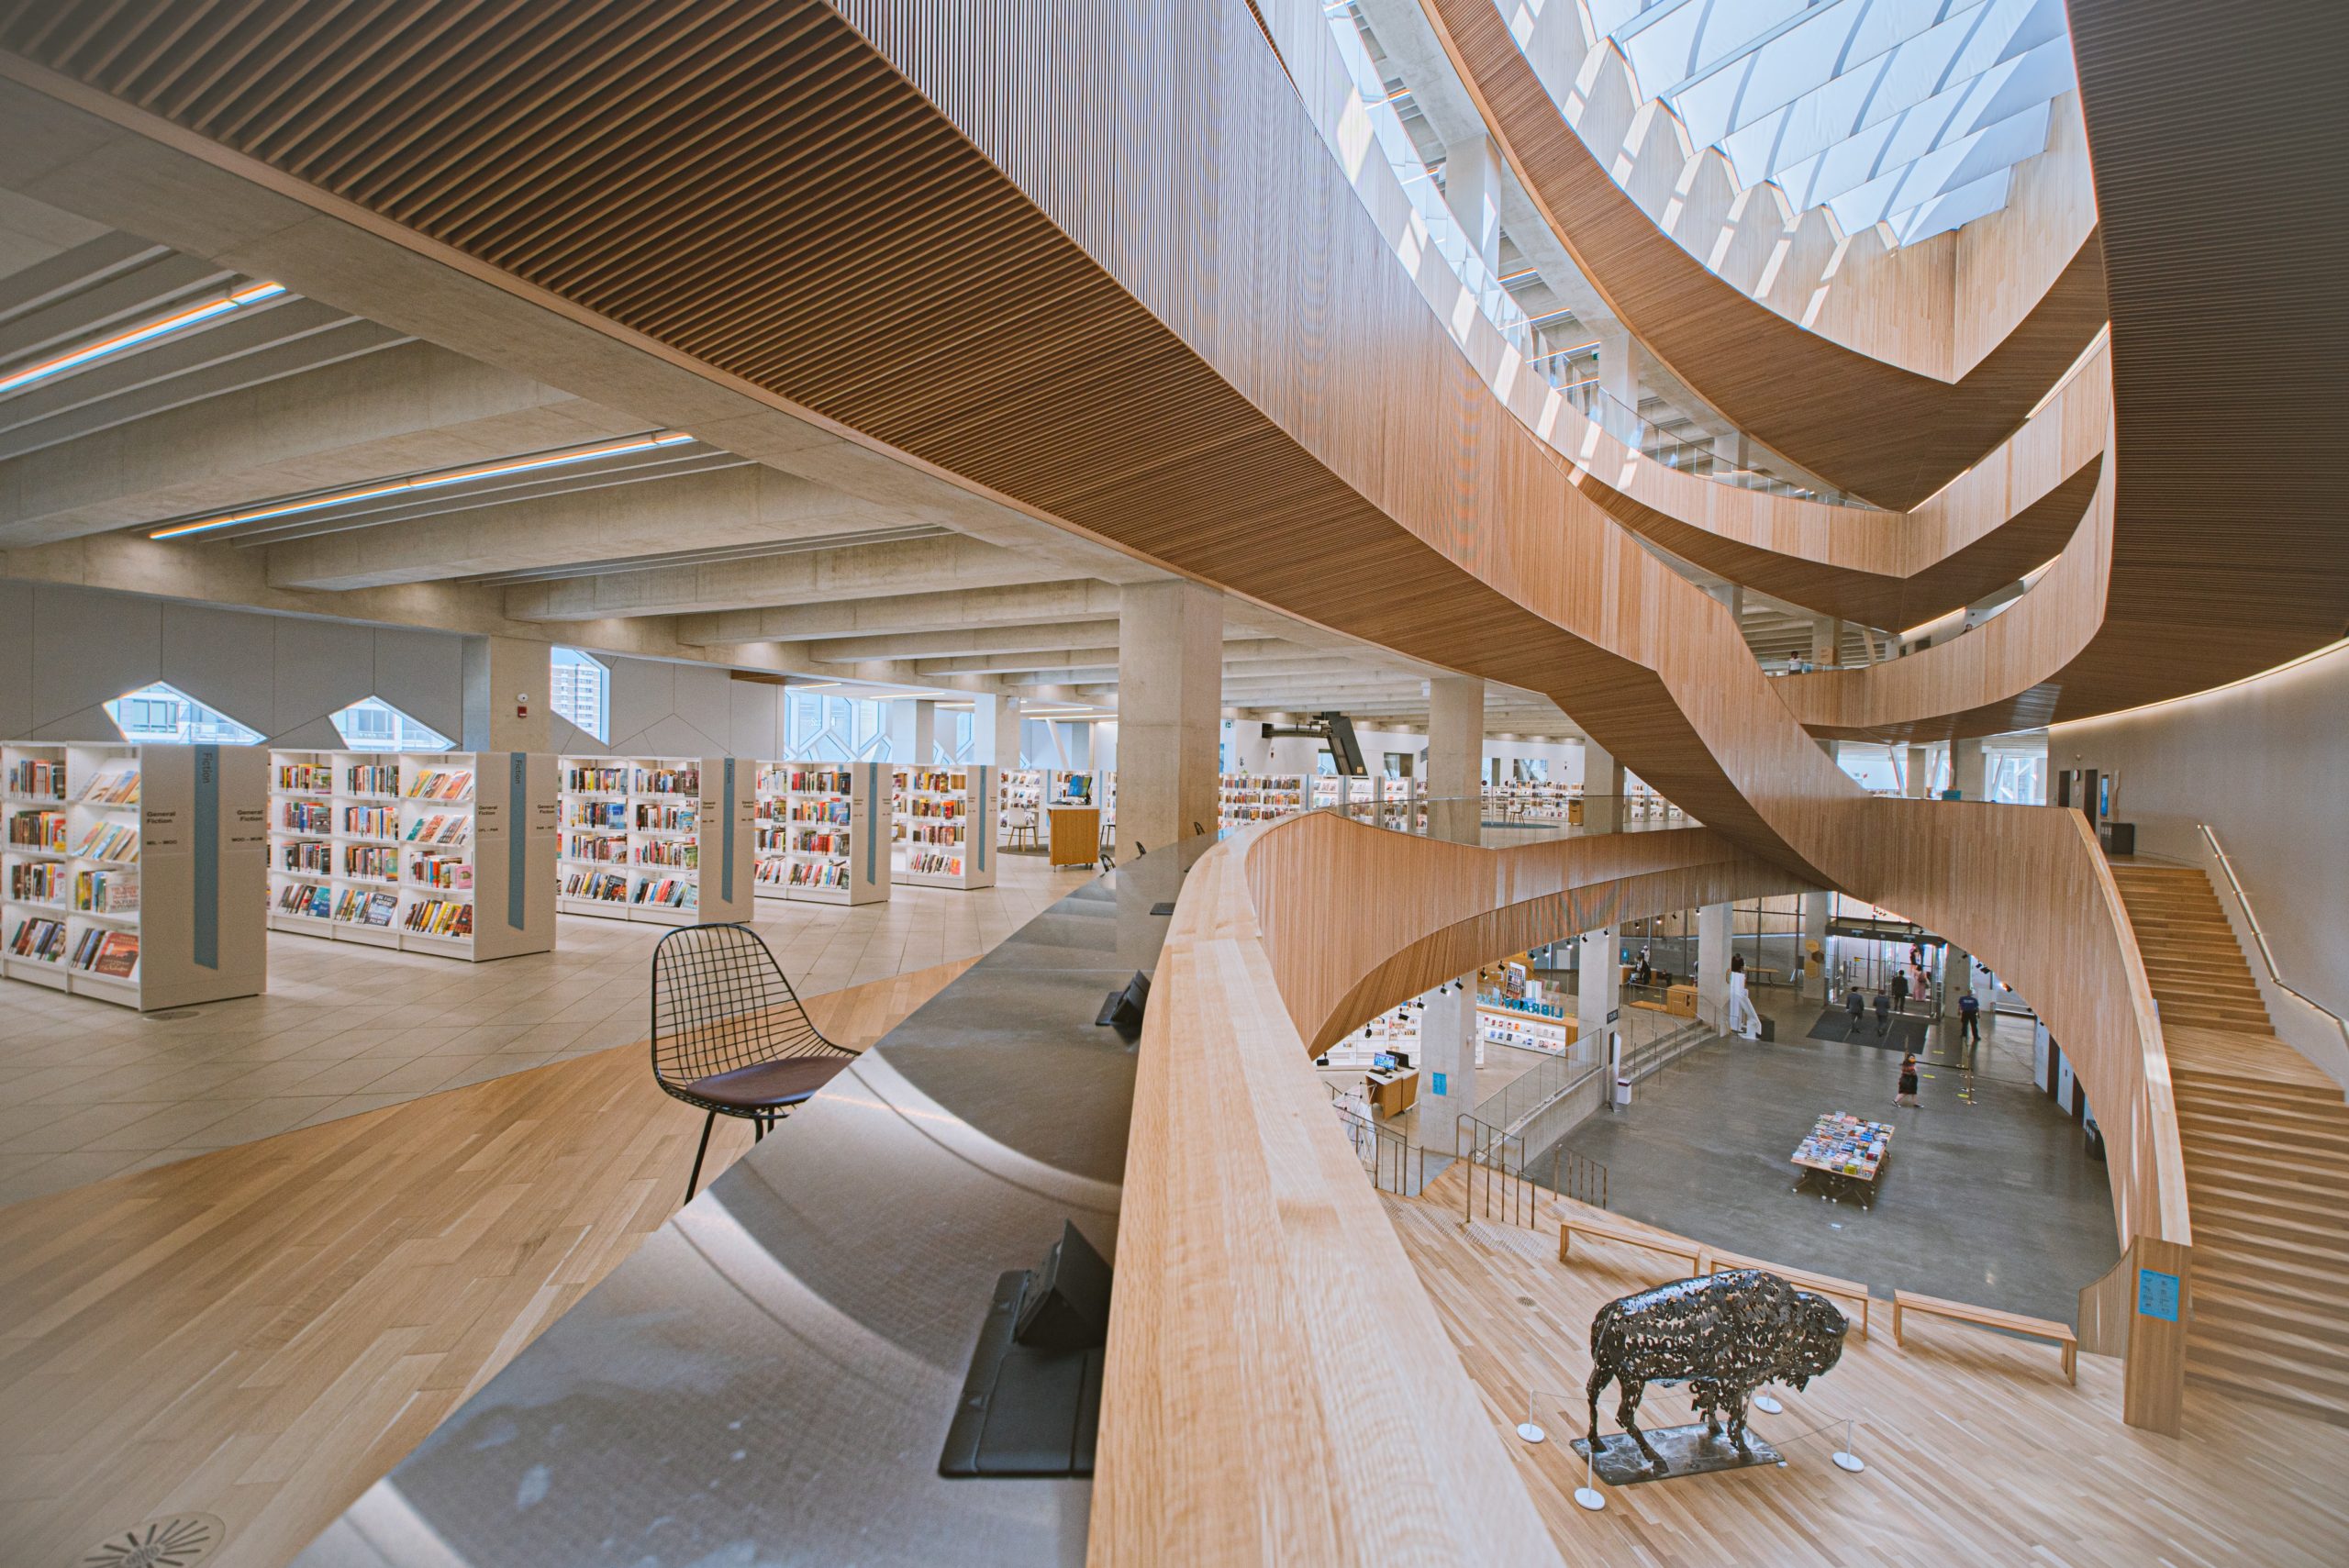 Interior view of the Calgary Public Library featuring work by Lionel Peyachew. An example of Indigenous placemaking.